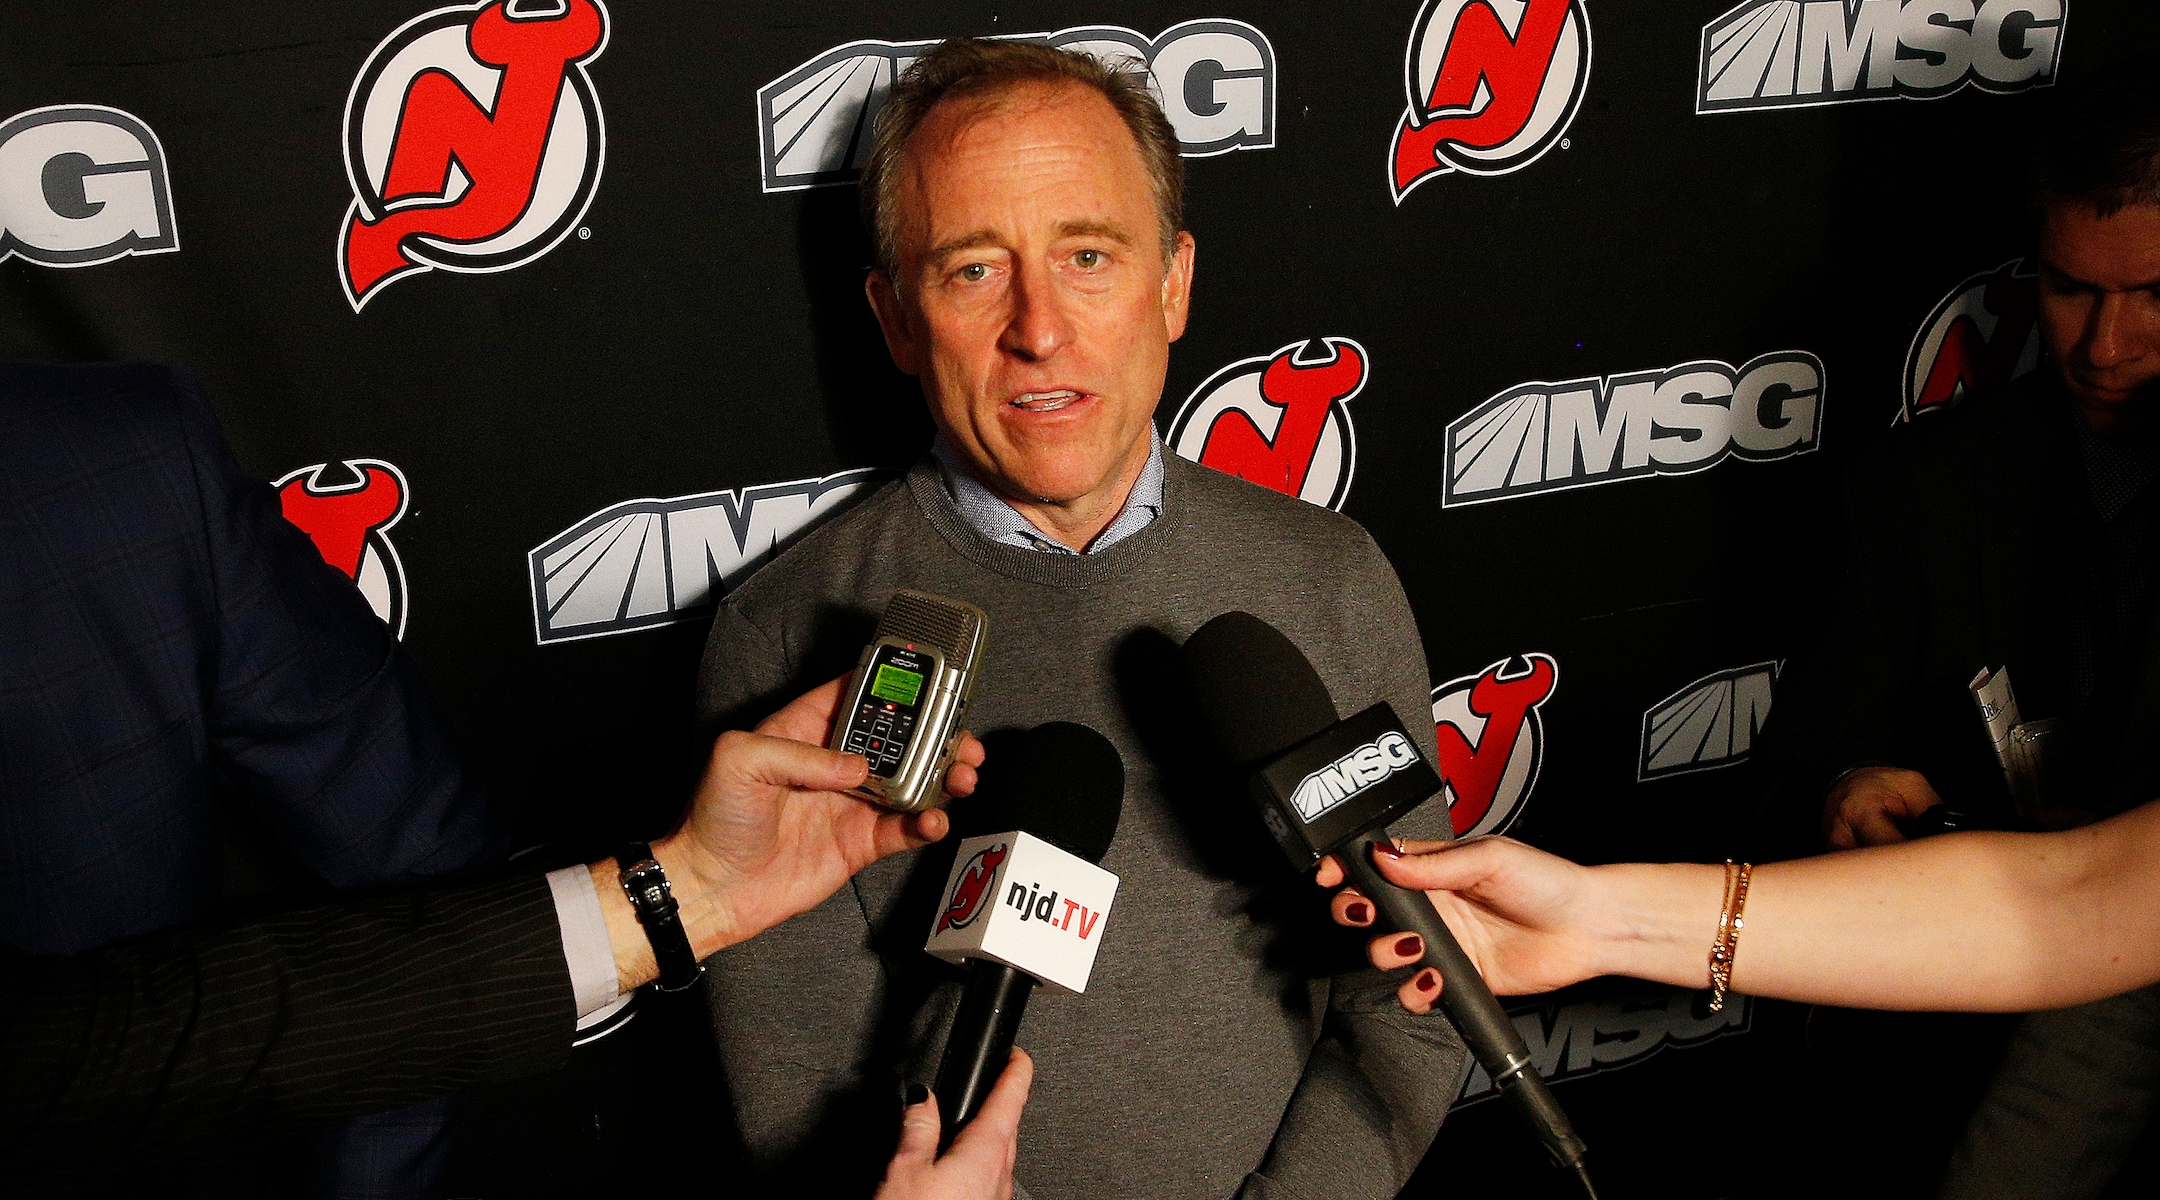 Josh Harris addresses the media at the Prudential Center in Newark, Jan. 12, 2020. (Andy Marlin/NHLI via Getty Images)